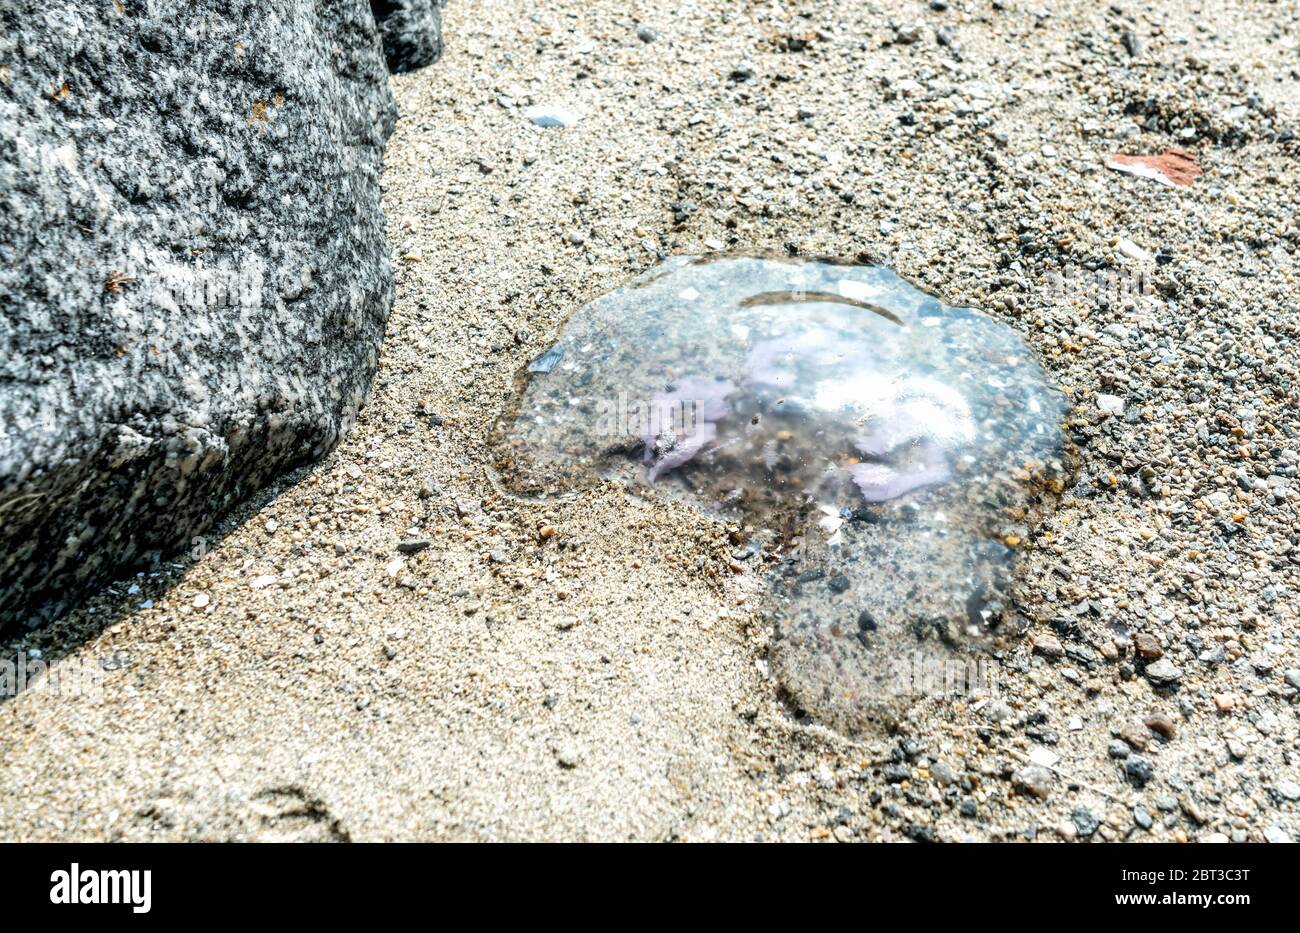 The drying and dying jellyfish in Norwegian fjords - tides out but the creature on the coast of Alsta Island. Close to Sandnessoen town, Norway Stock Photo